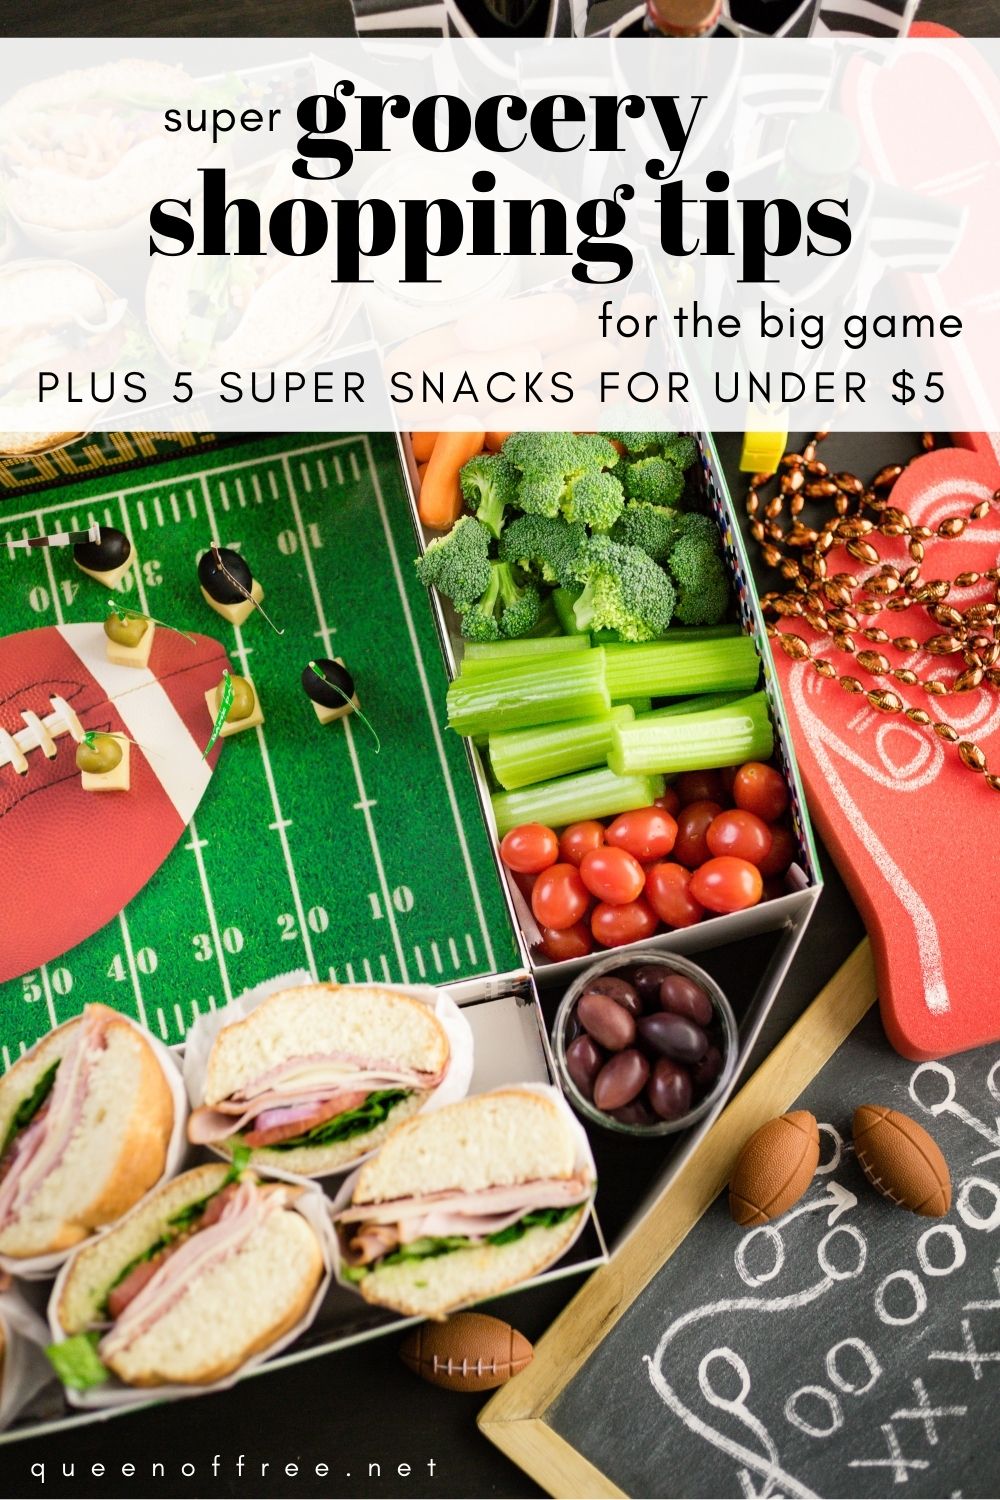 Gearing up for the big game? Don't miss these SUPER Grocery Store Shopping tips PLUS 5 Snack Ideas for Under $5!